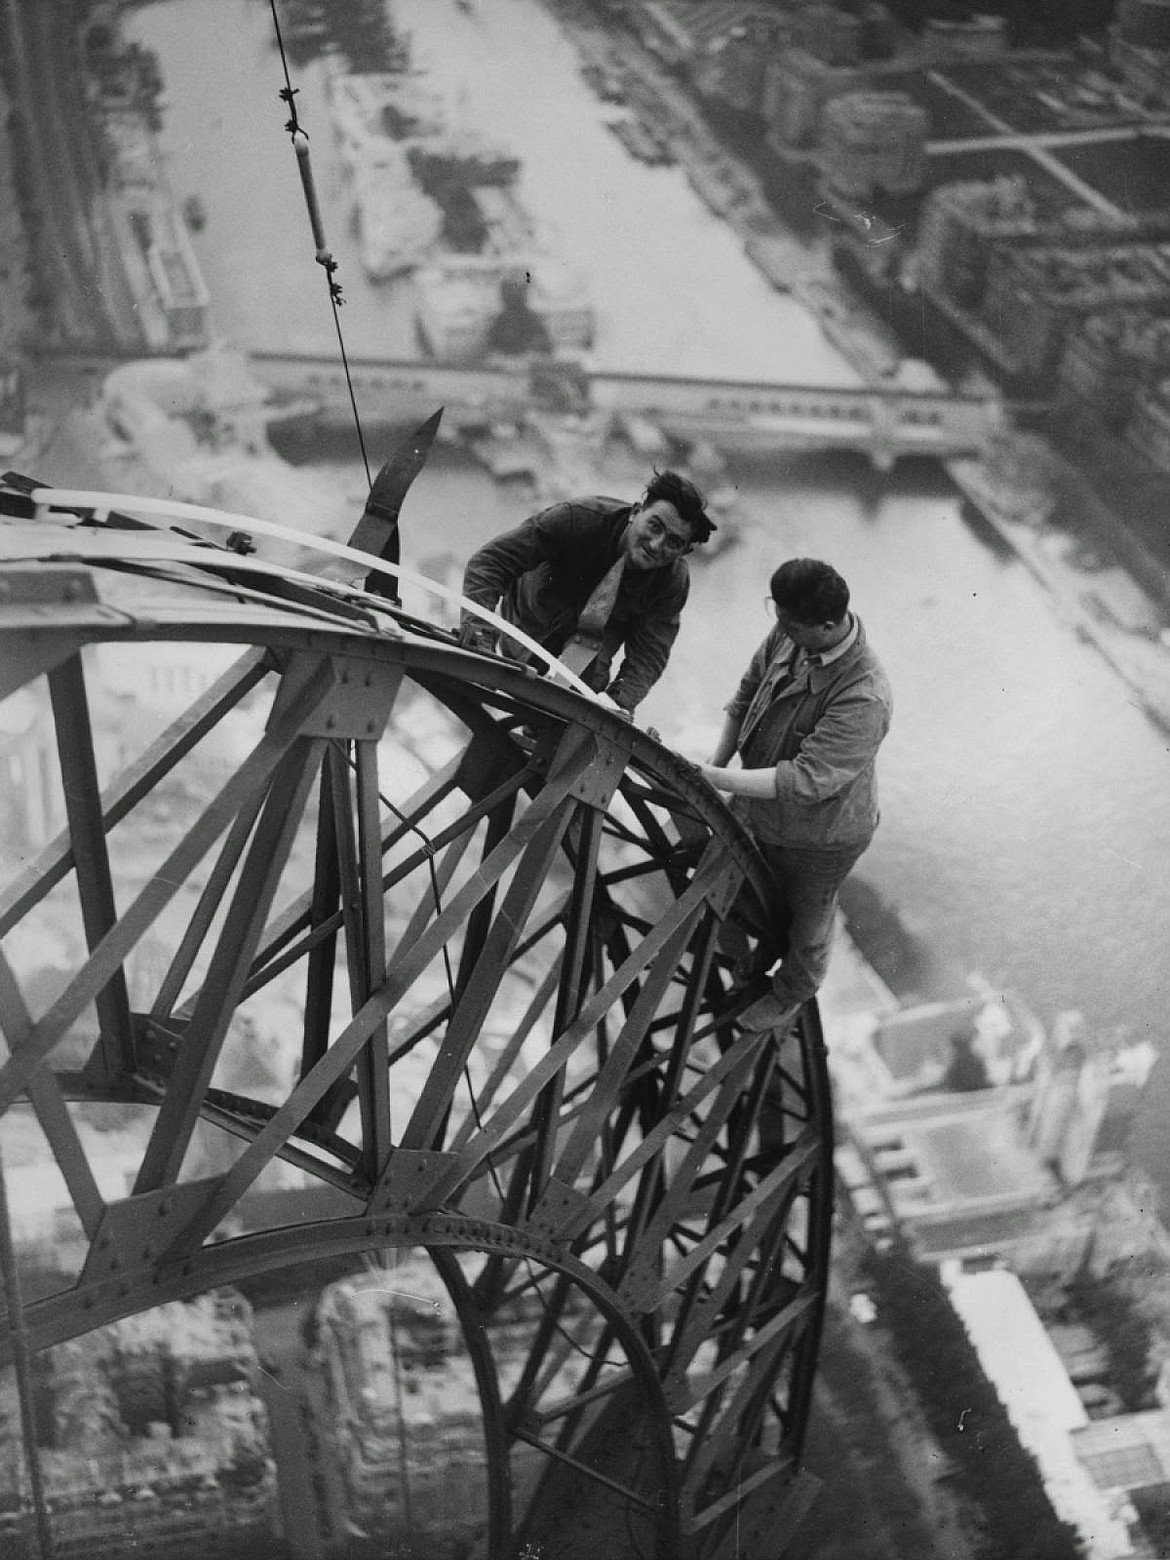 GOOGLE IMAGES
Building the Eiffel Tower next to Seine River (1887-1889).